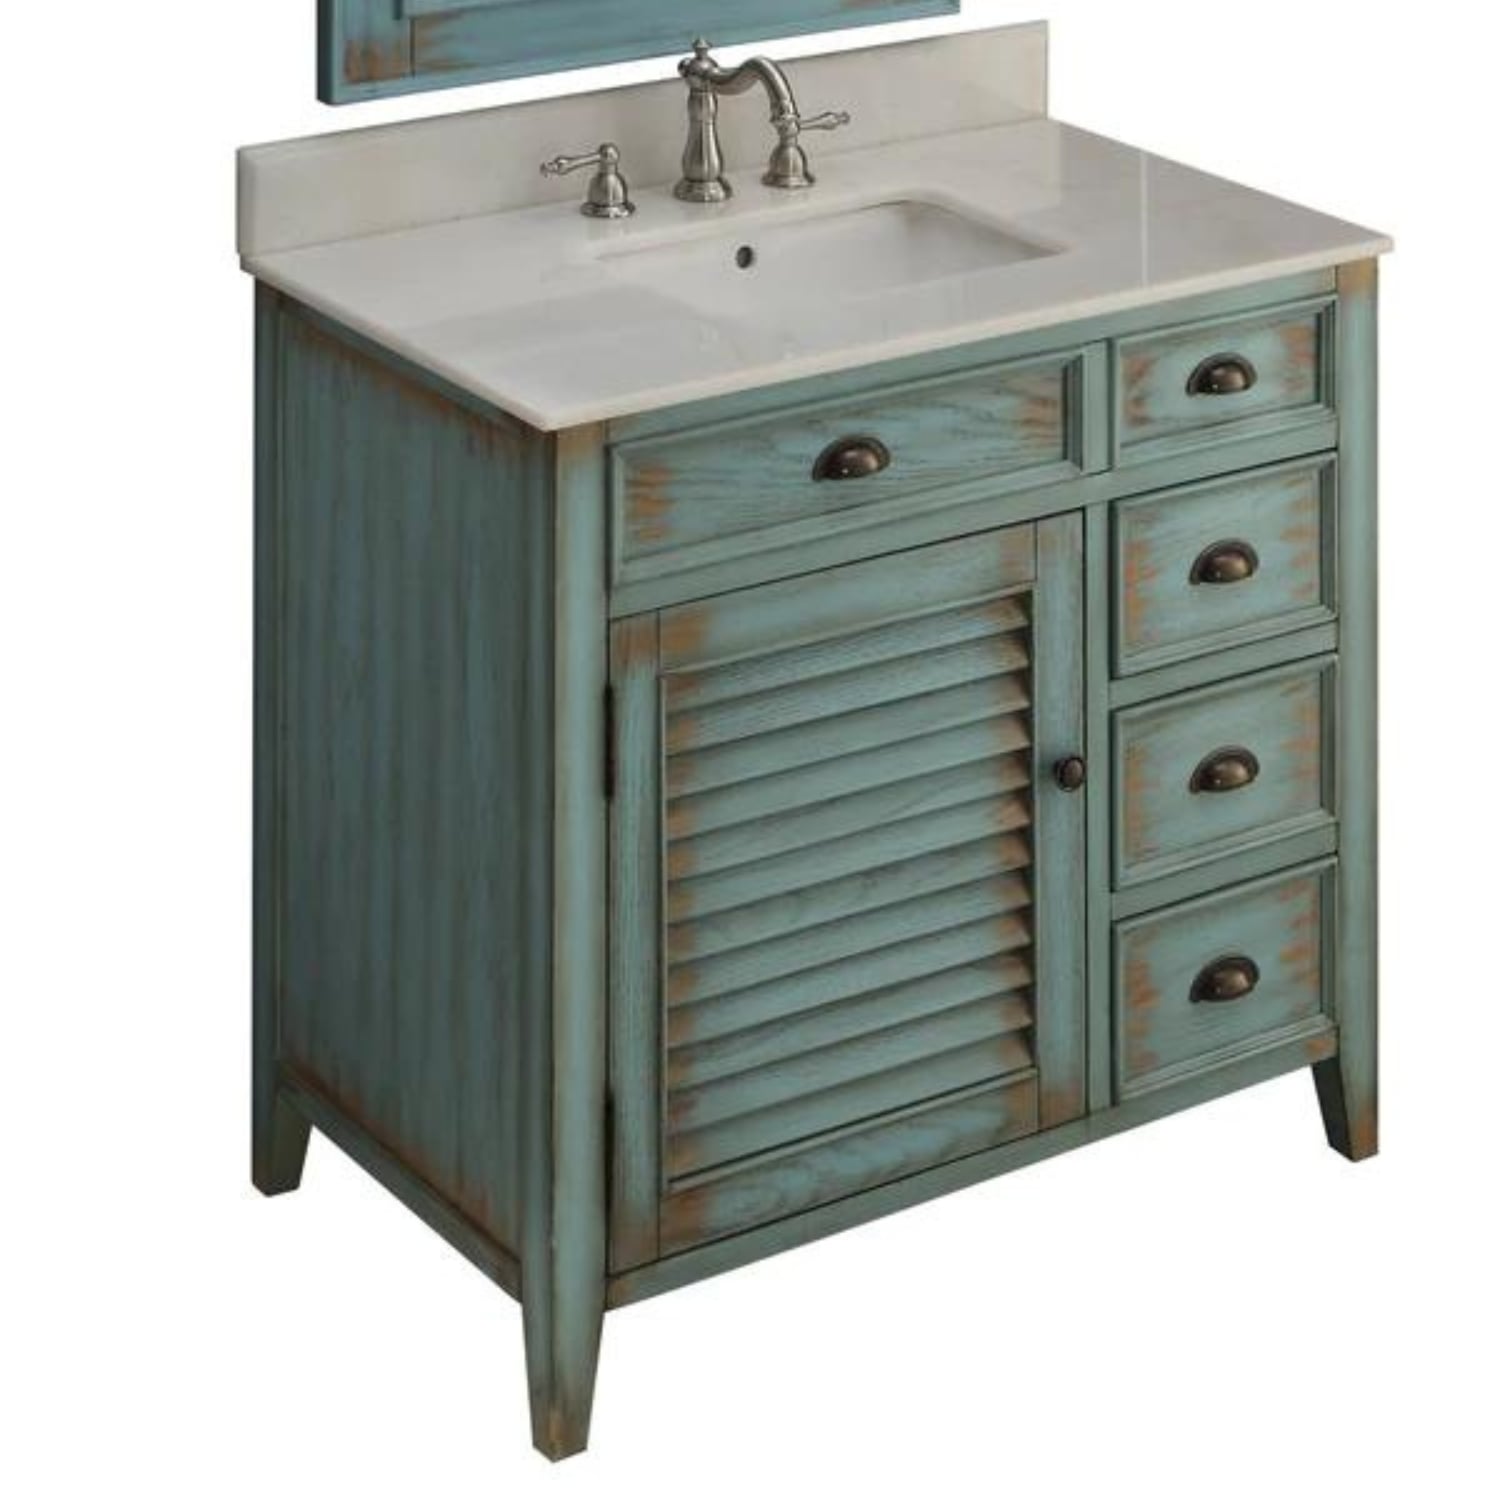 Abbeville 36" Distressed Blue Vanity with White Marble Top - Traditional Bathroom Vanity